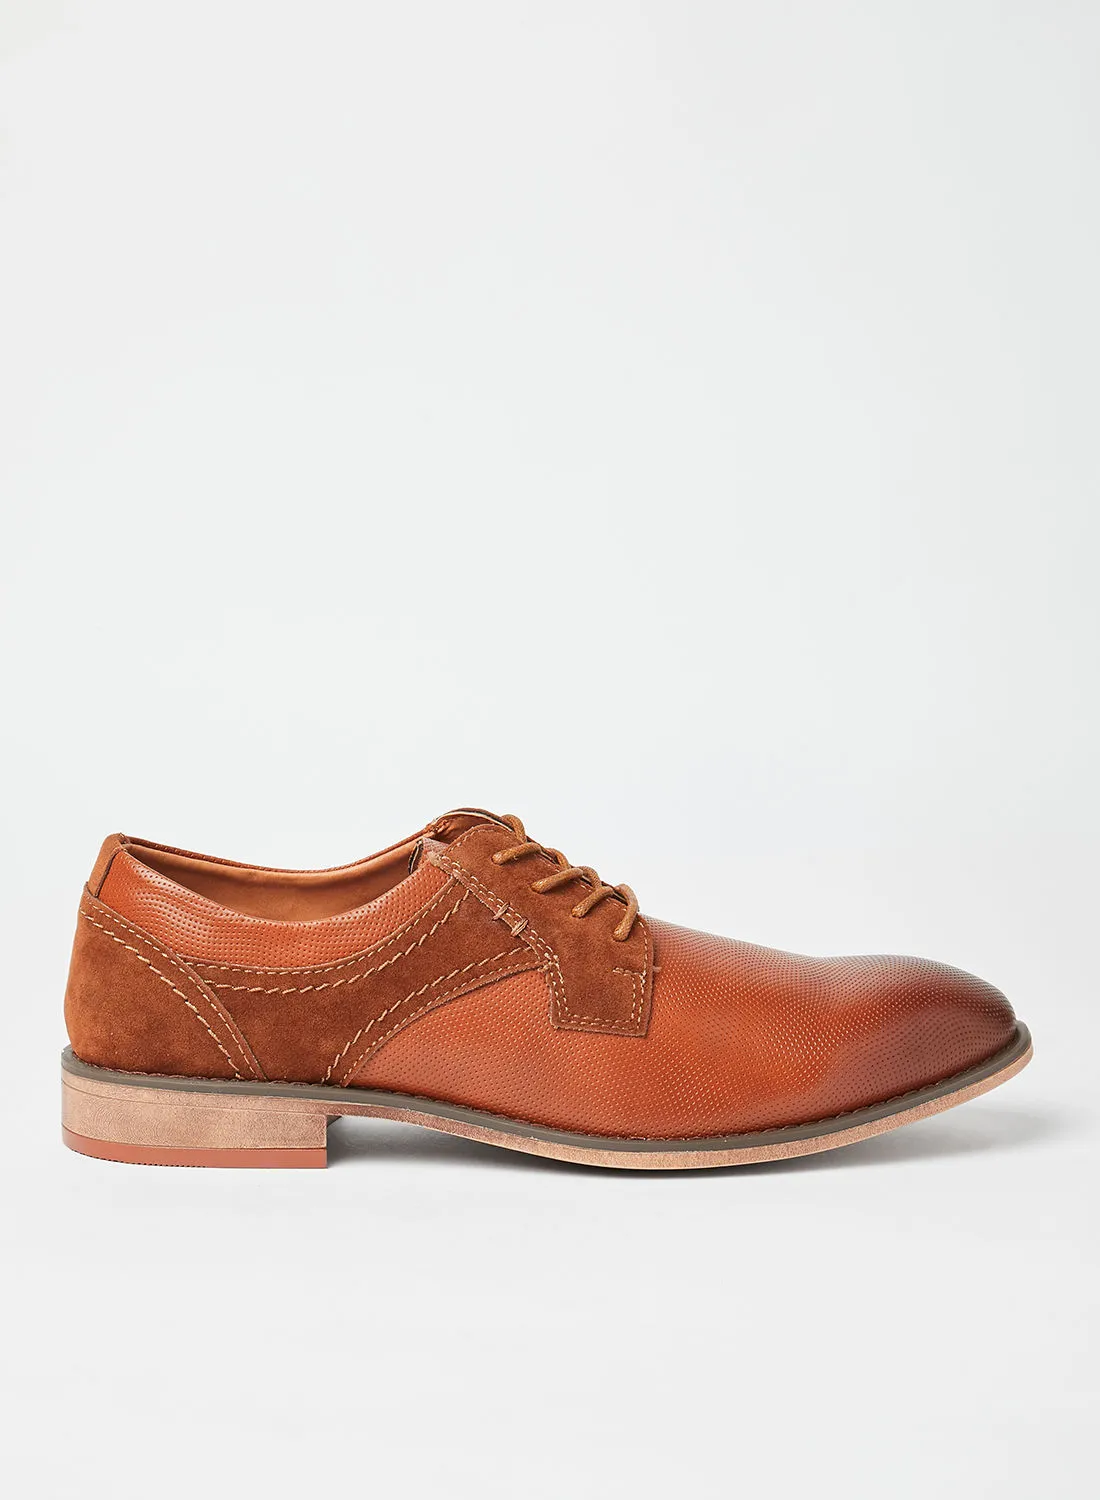 CALL IT SPRING Renne Oxford Lace Up Shoes Brown